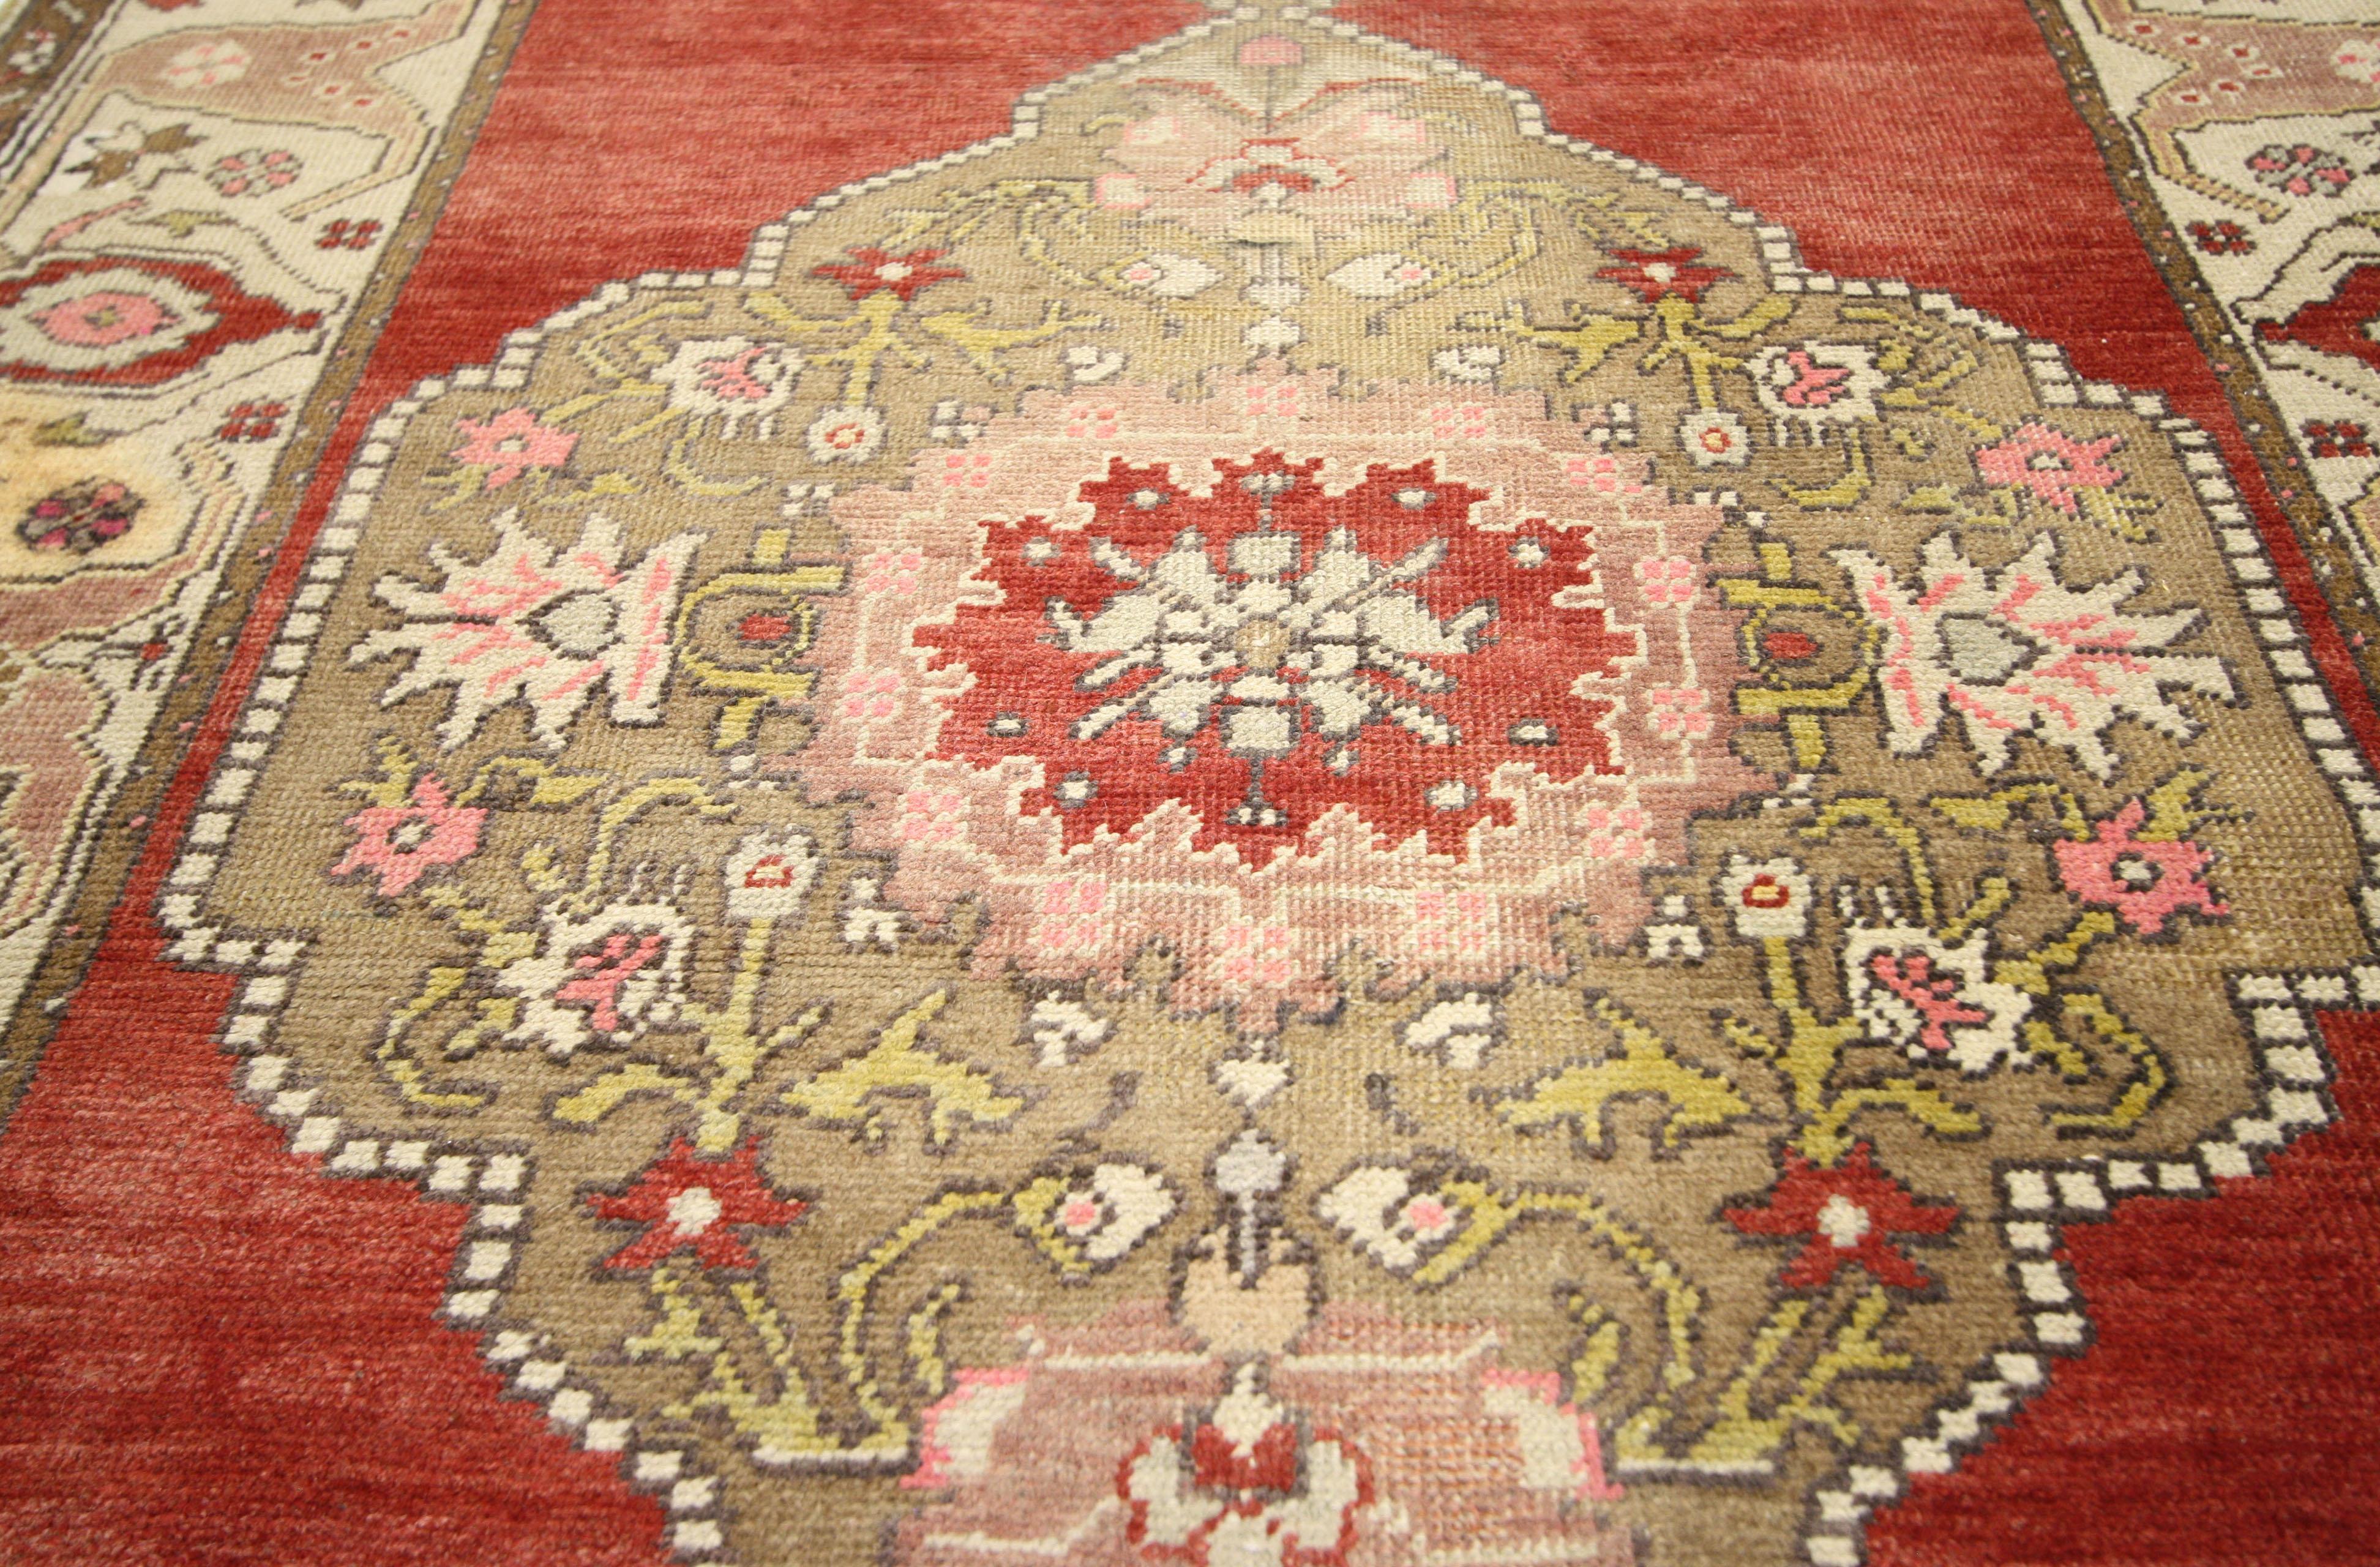 50757, vintage Turkish Oushak runner, hallway runner. Create entry envy or a fabulous foyer by adding color, pattern and style. This hand knotted wool vintage Turkish Oushak runner features three connected hexagonal medallions with floral pendants